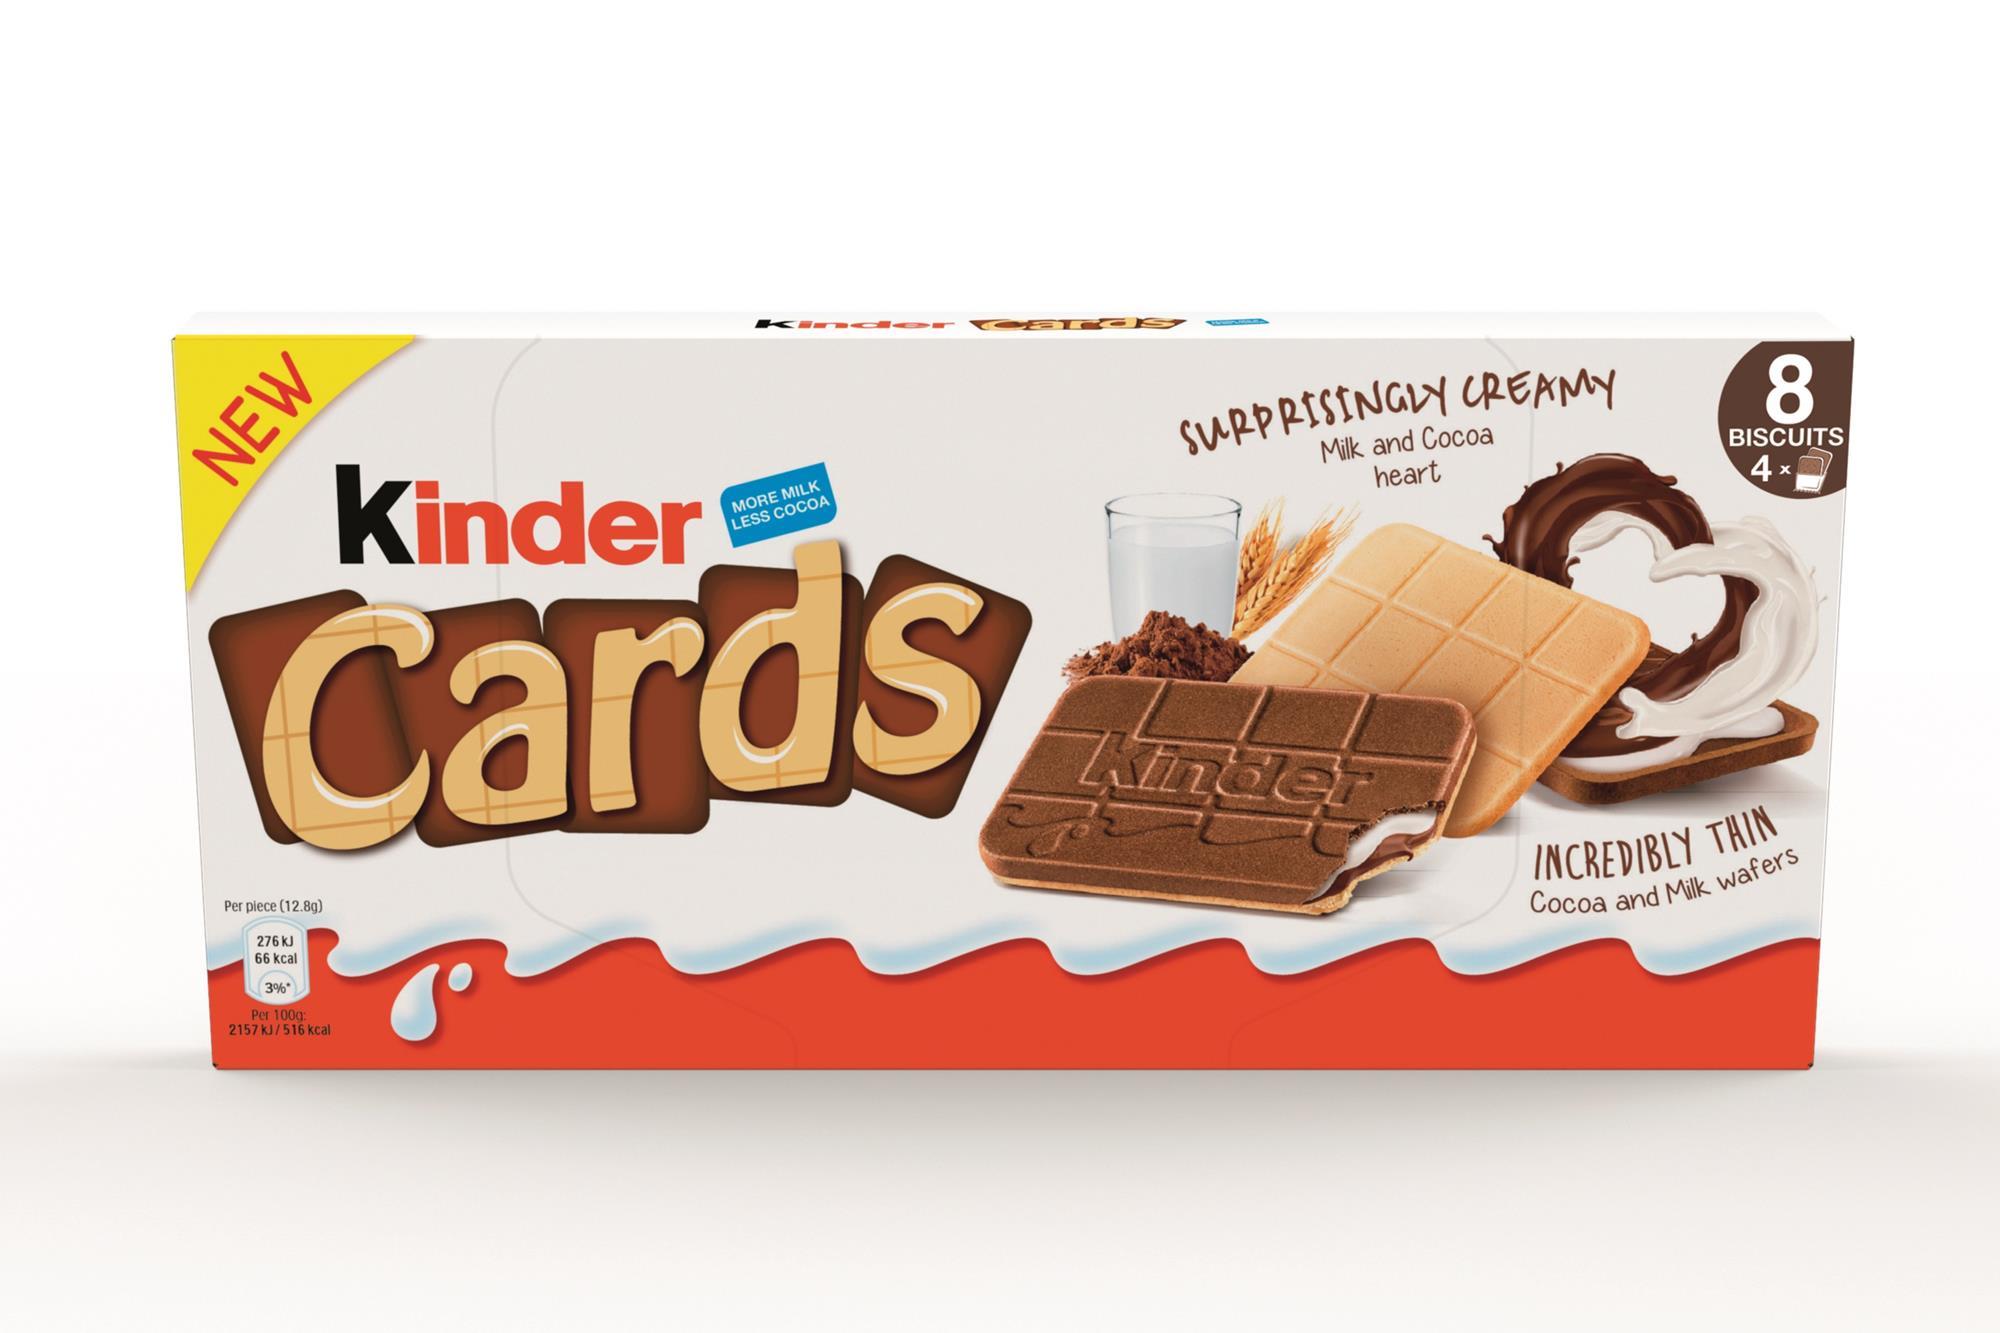 Kinder expands into biscuits with 'Cards' wafers, News